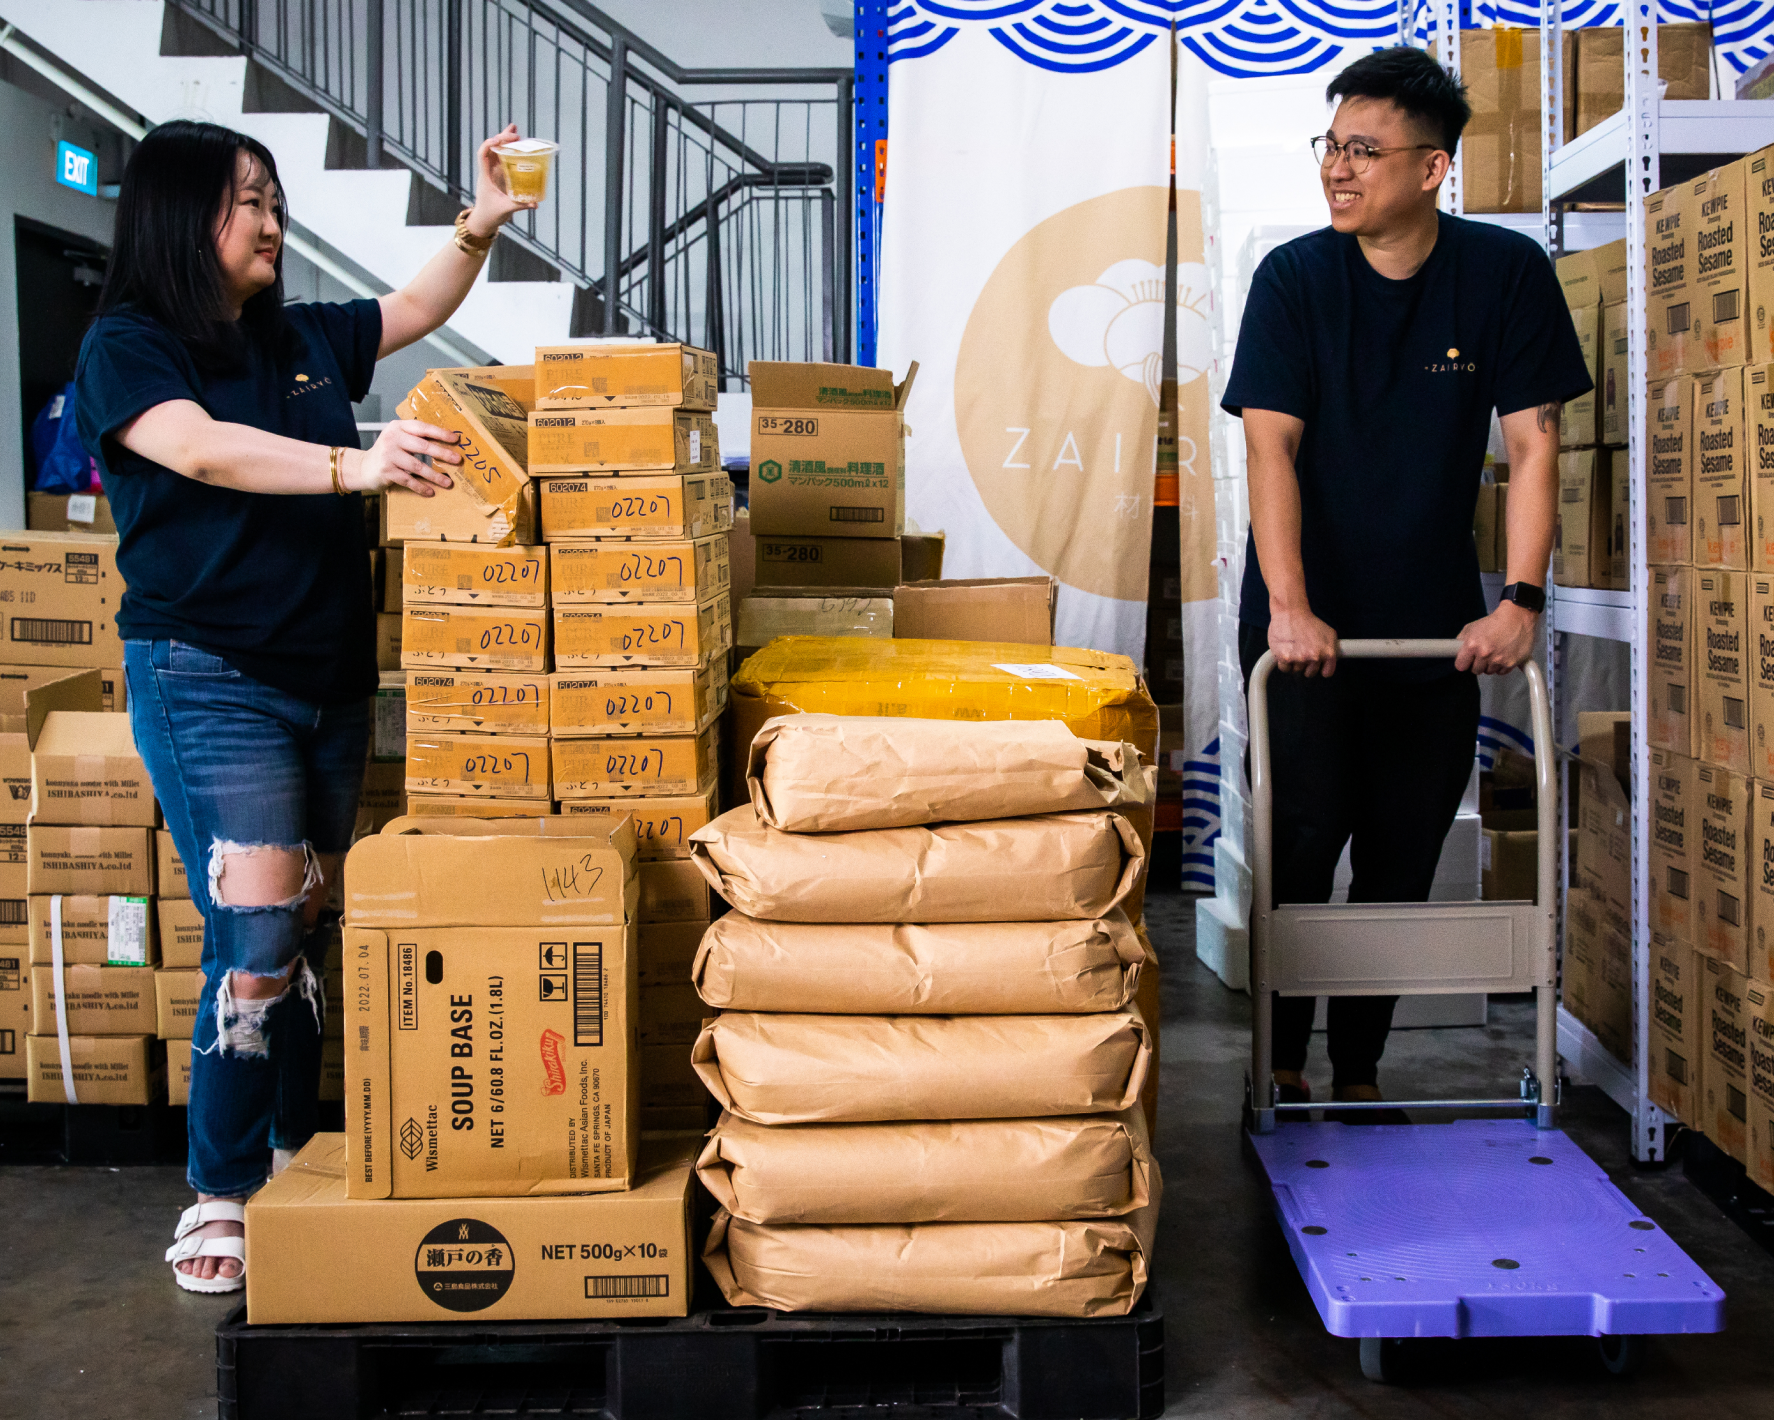 The Zairyo team in a warehouse with products.